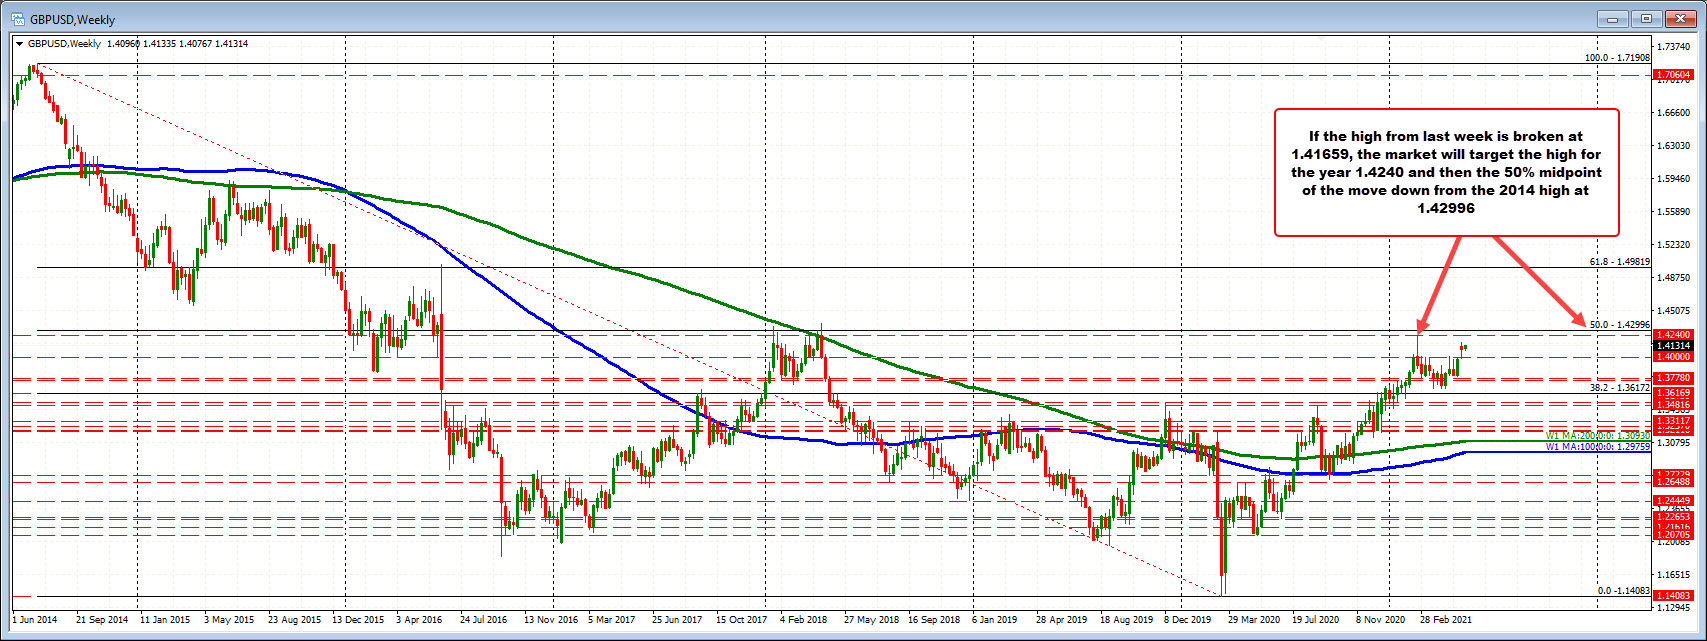 GBPUSD on the weekly chart